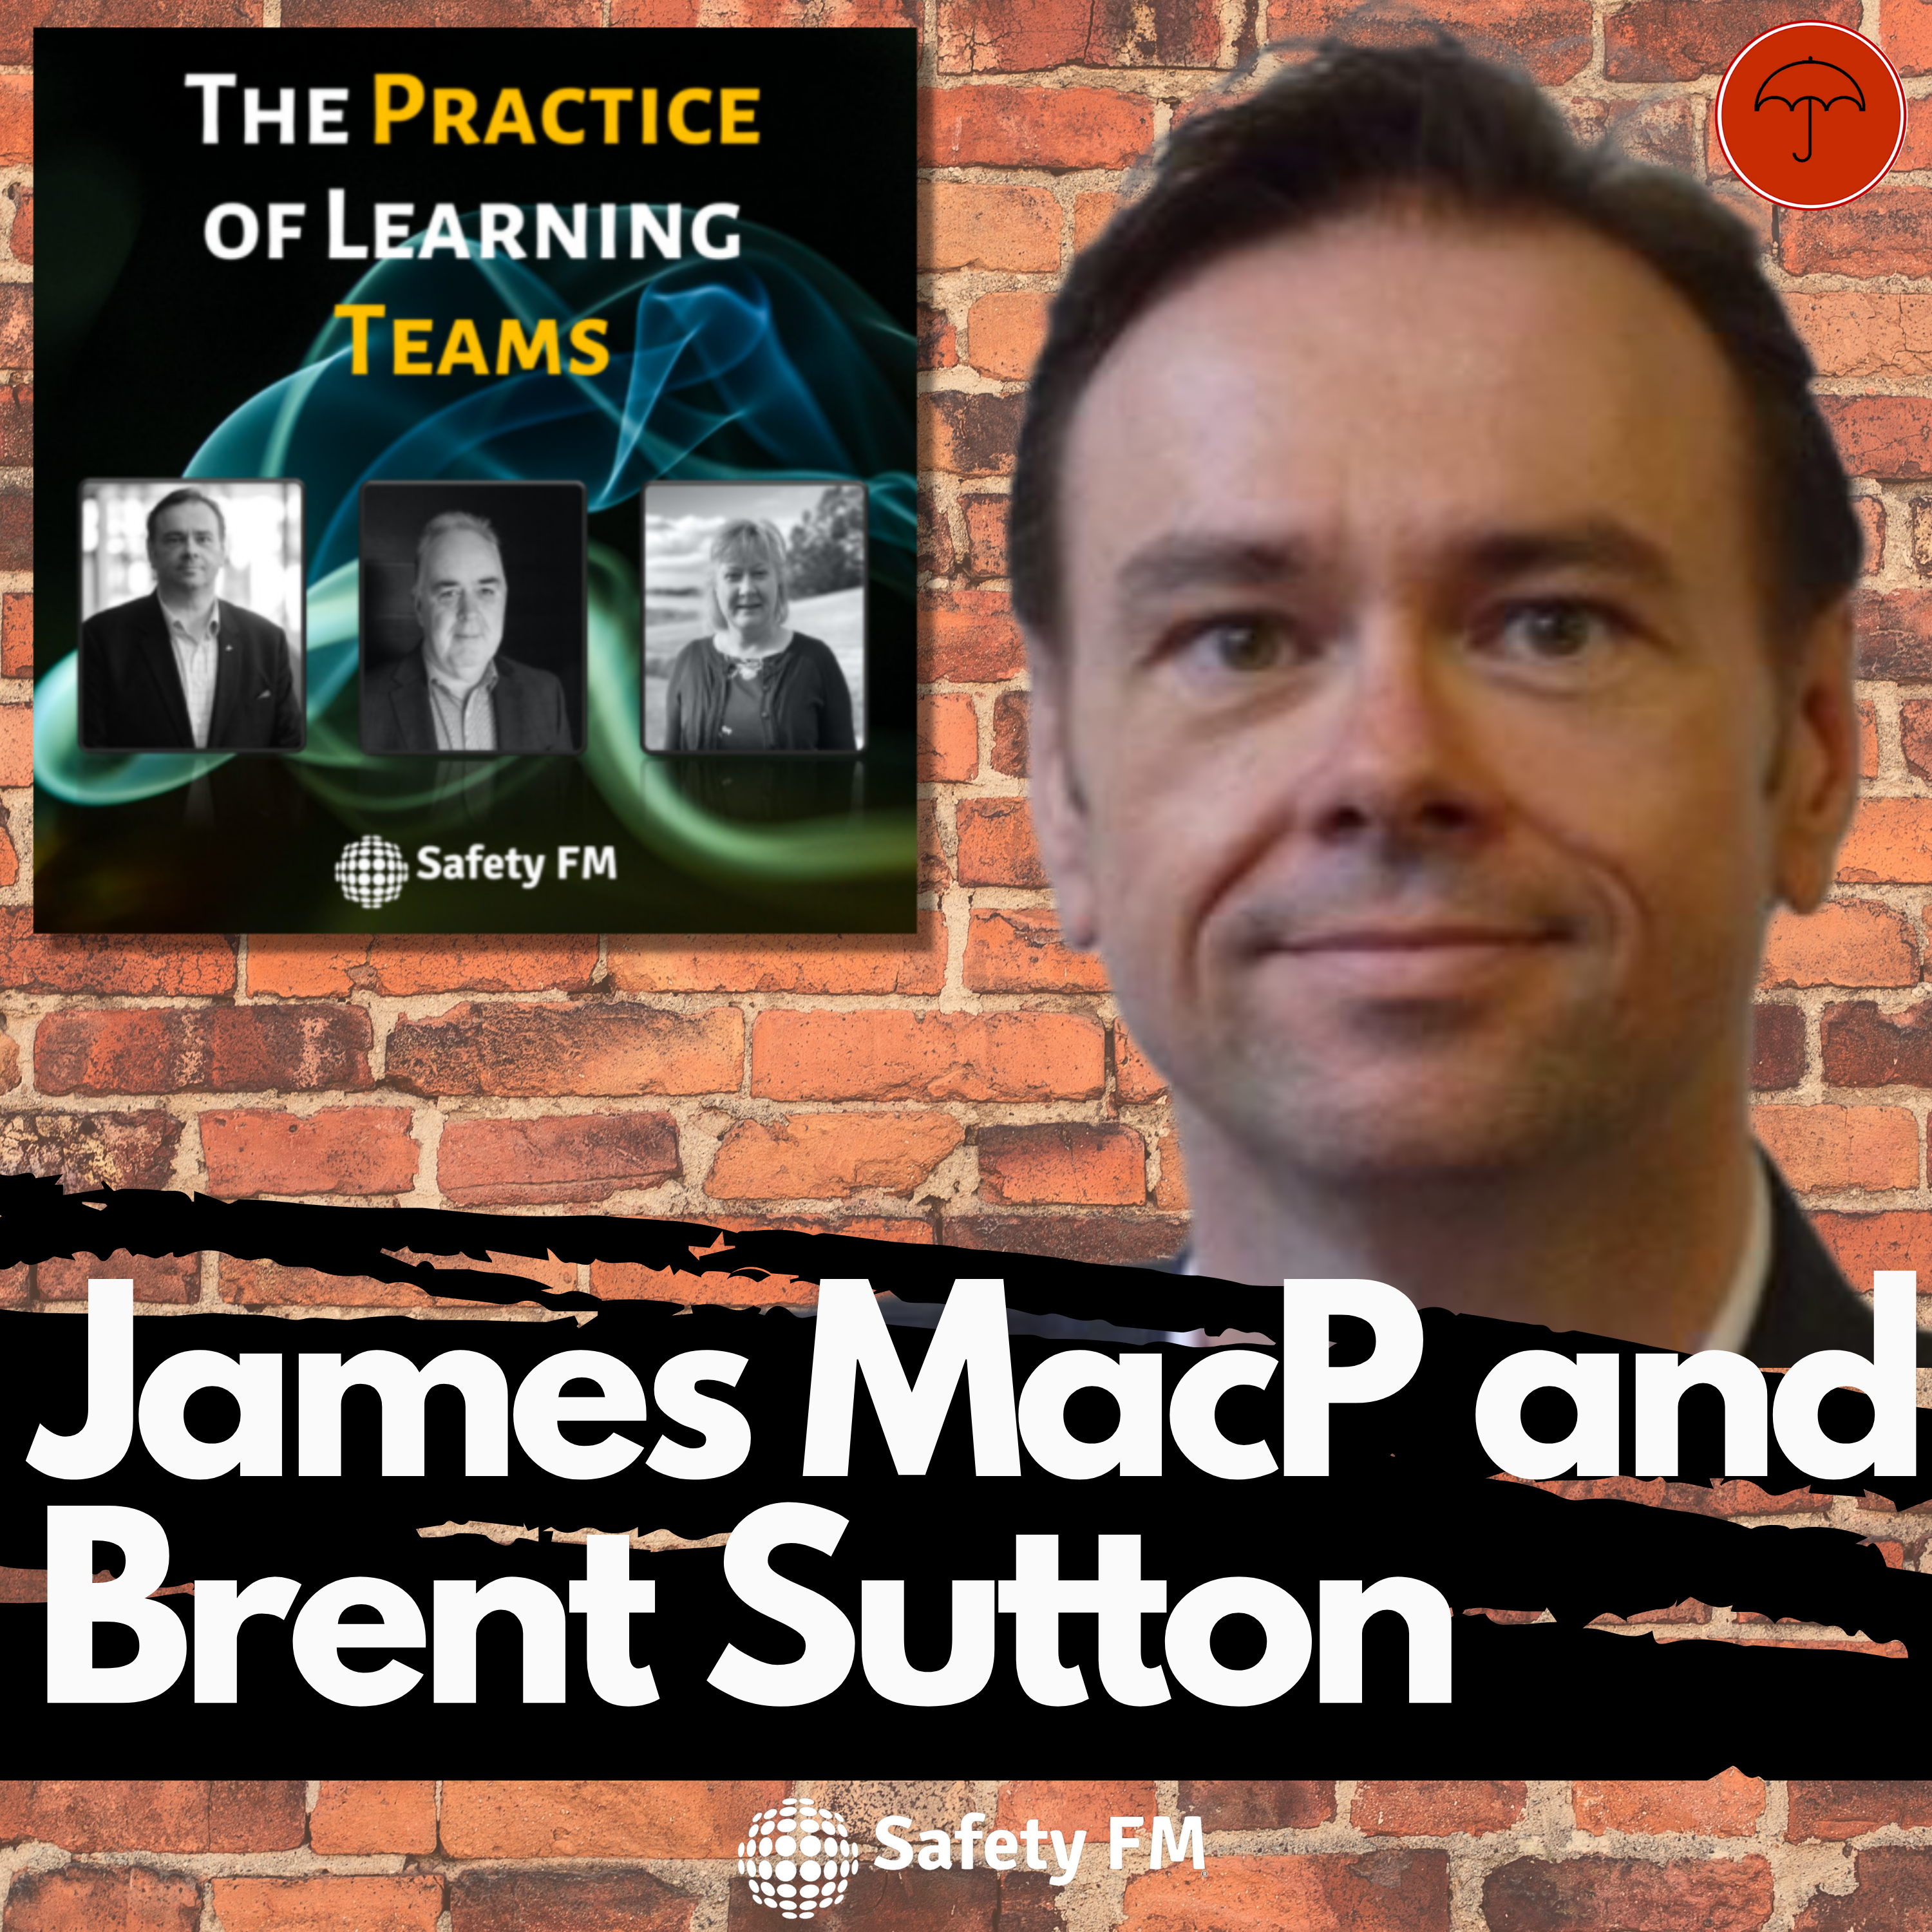 The Practice of Learning Teams Podcast with Brent Sutton